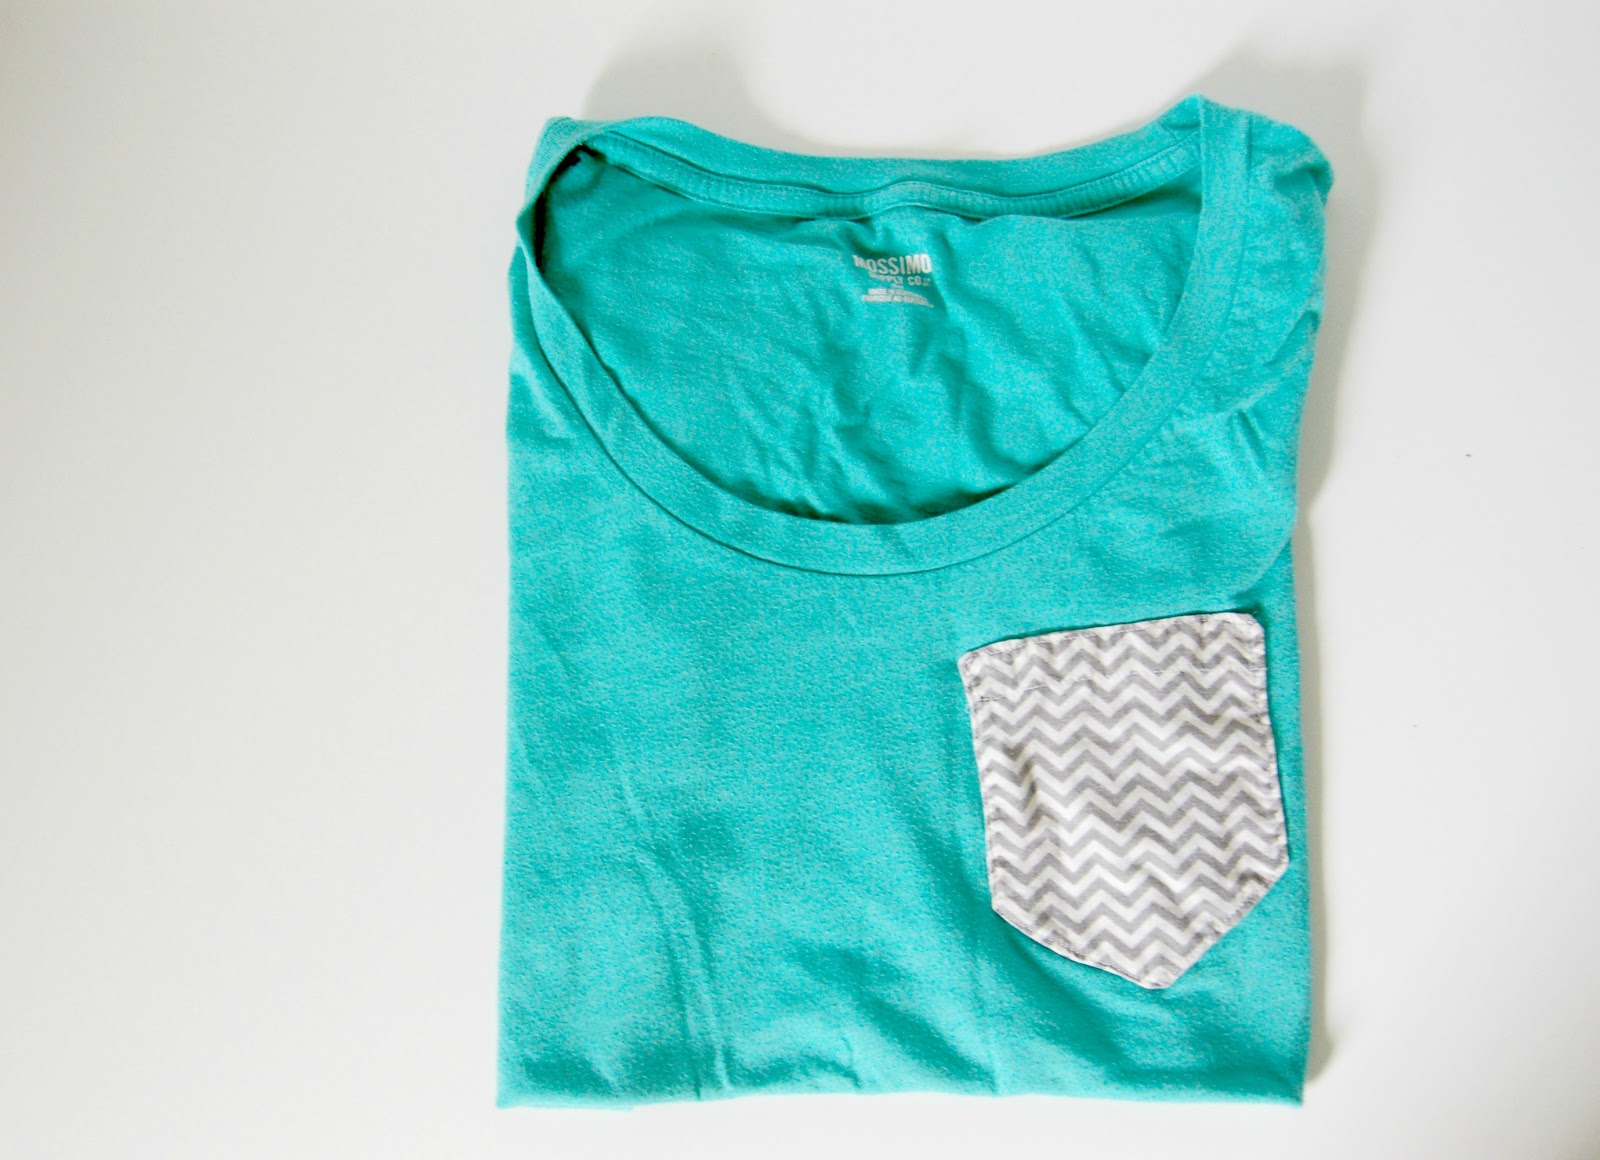 purely being her: diy pocket tee